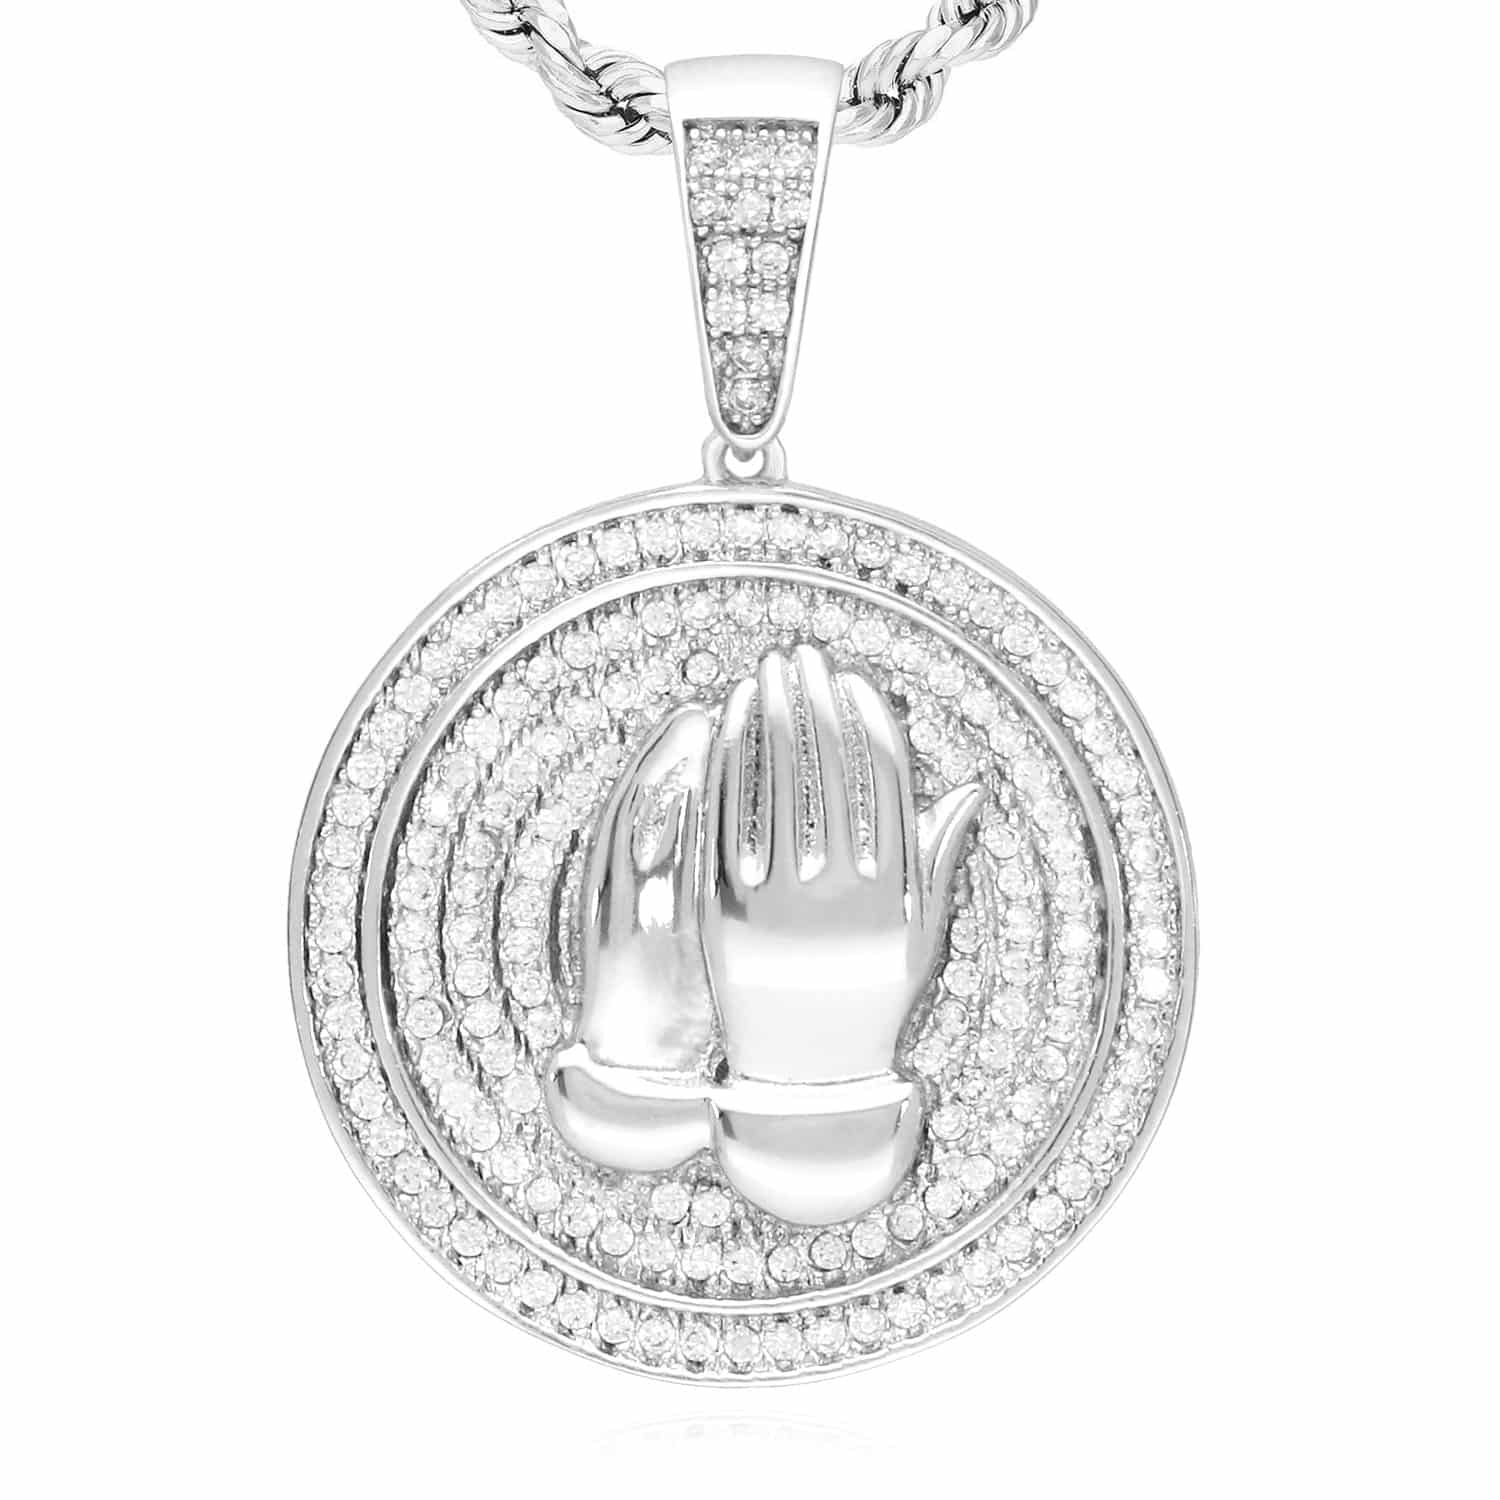 14k Gold Over Silver Simulated Diamond Praying Hands Medallion Pendant 1.38" - White Gold Plated